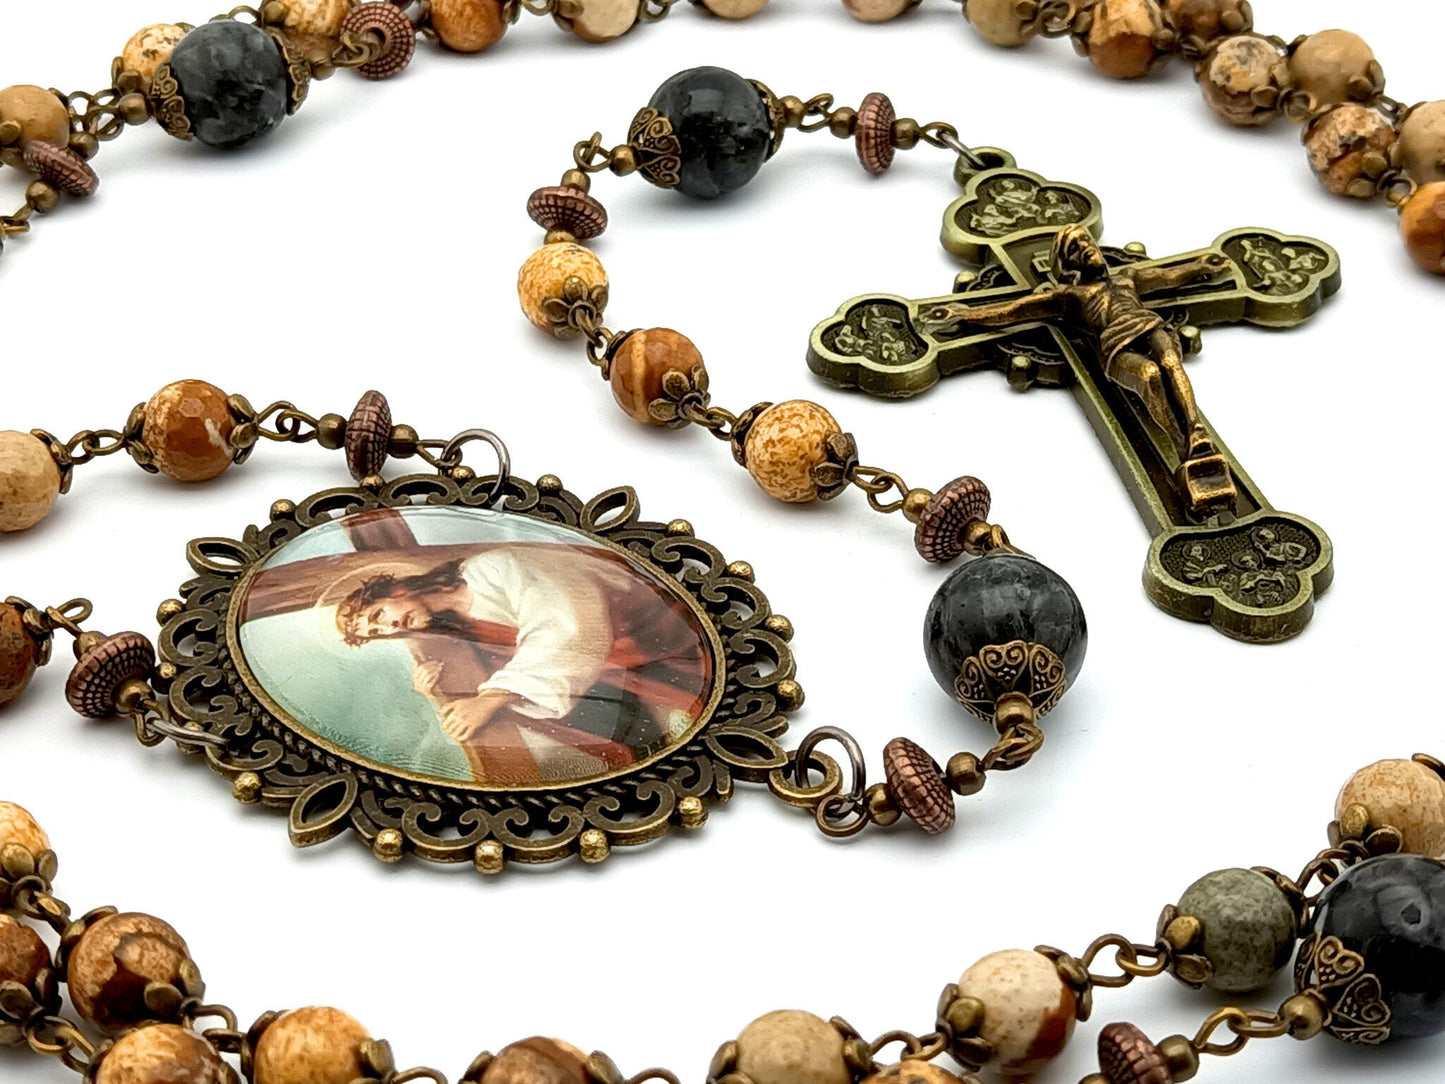 Way of the Cross unique rosary beads with natural gemstone beads, large twelve apostles crucifix and large picture centre medal.